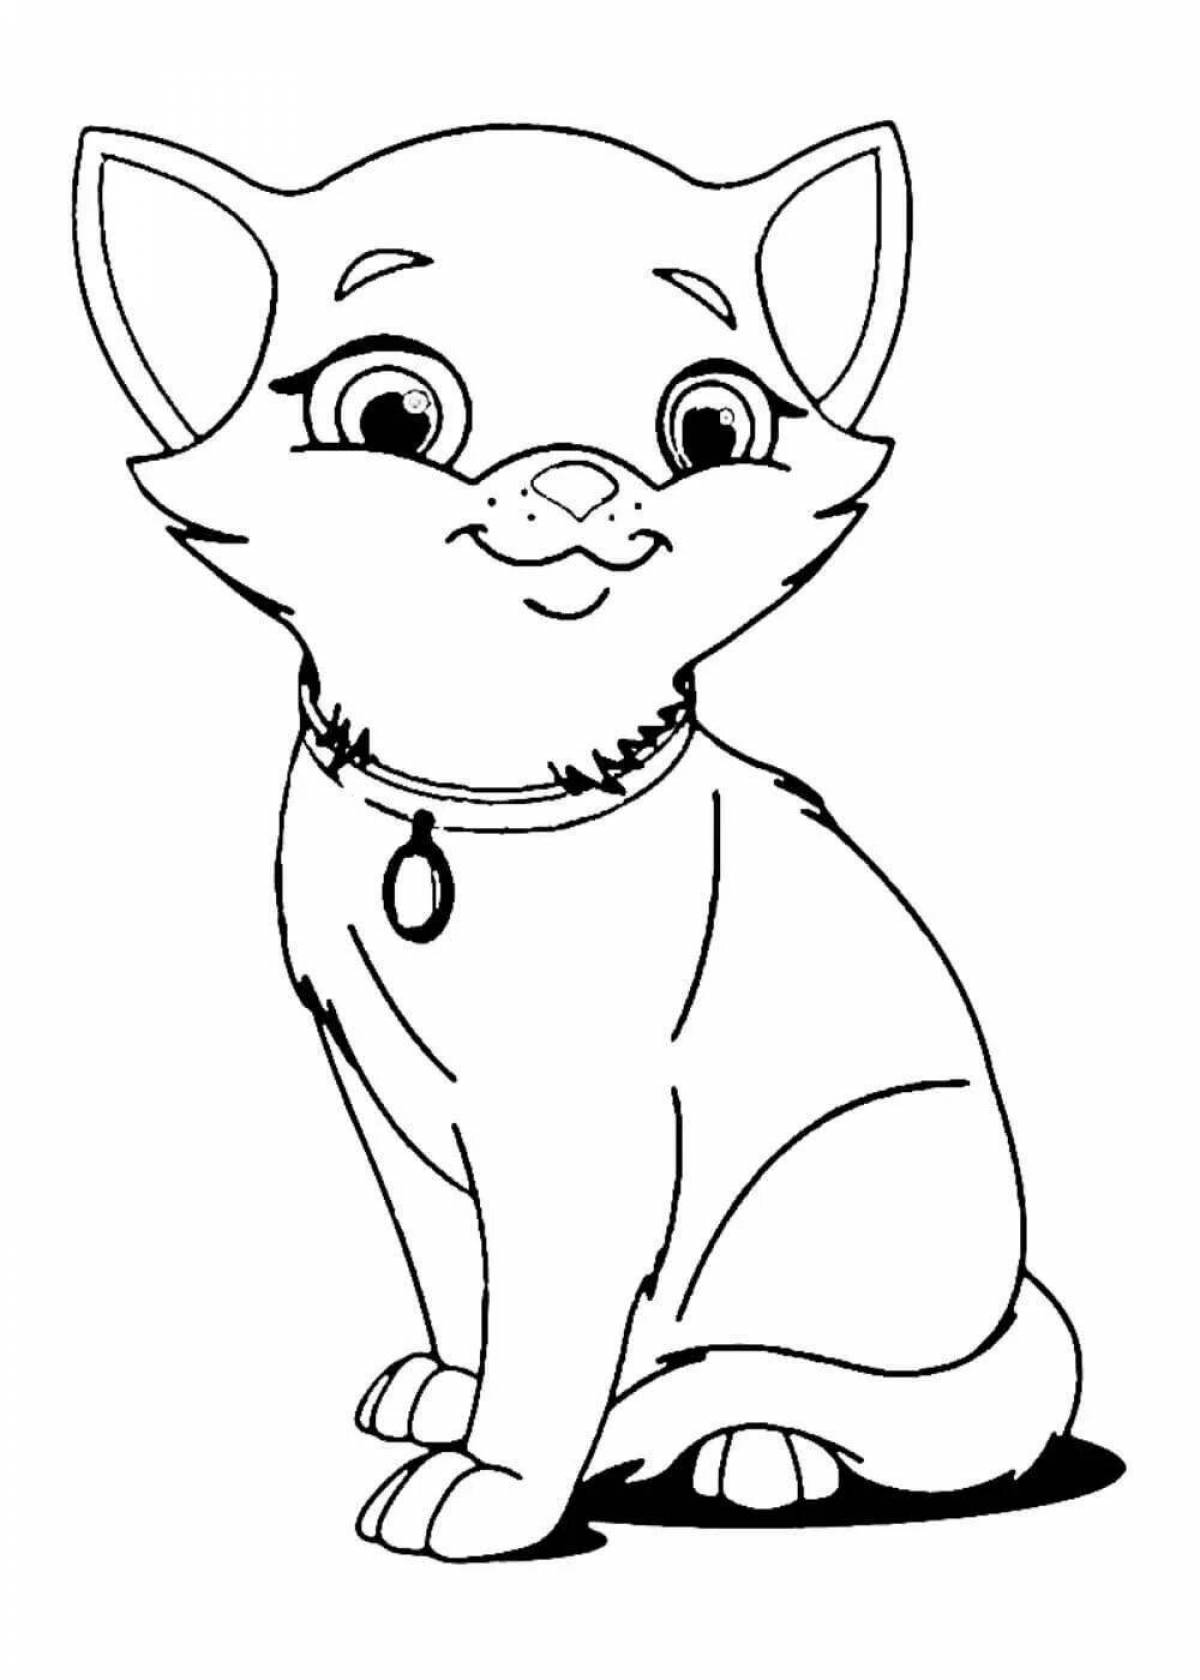 Soft cute cat coloring book for kids